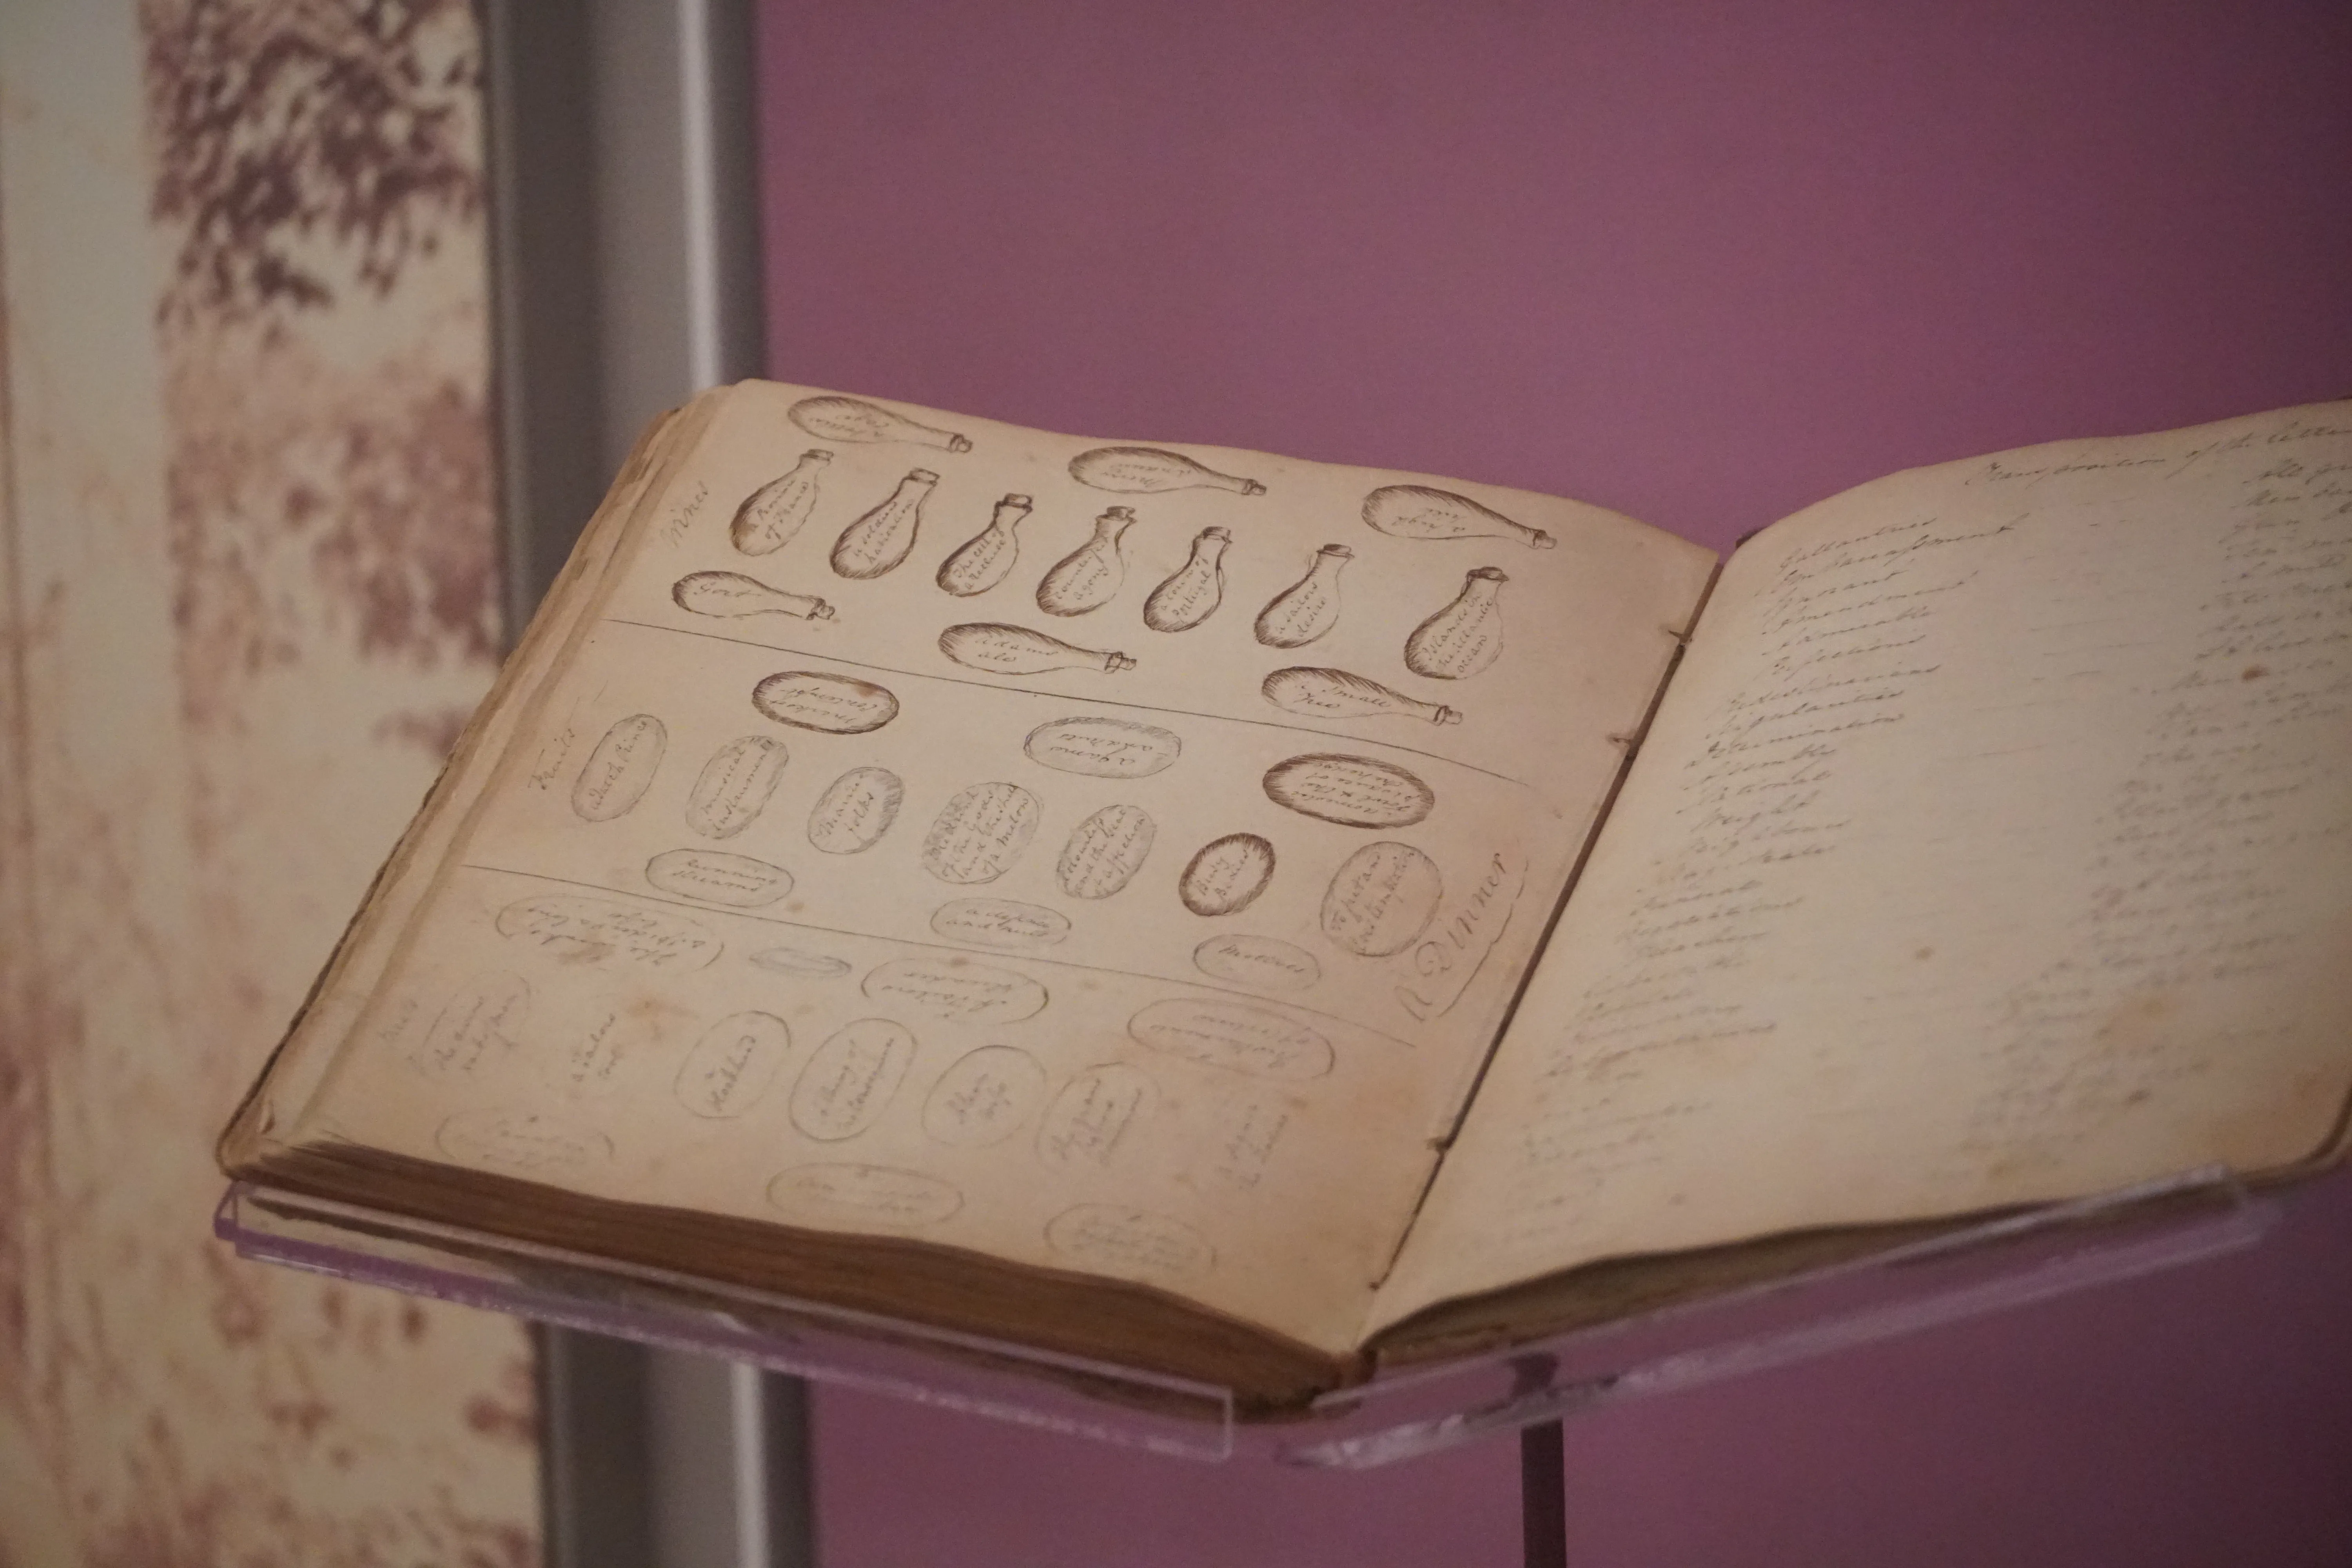 A commonplace book, one of several artifacts in the new Seton Shrine Museum. Credit: Seton Shrine